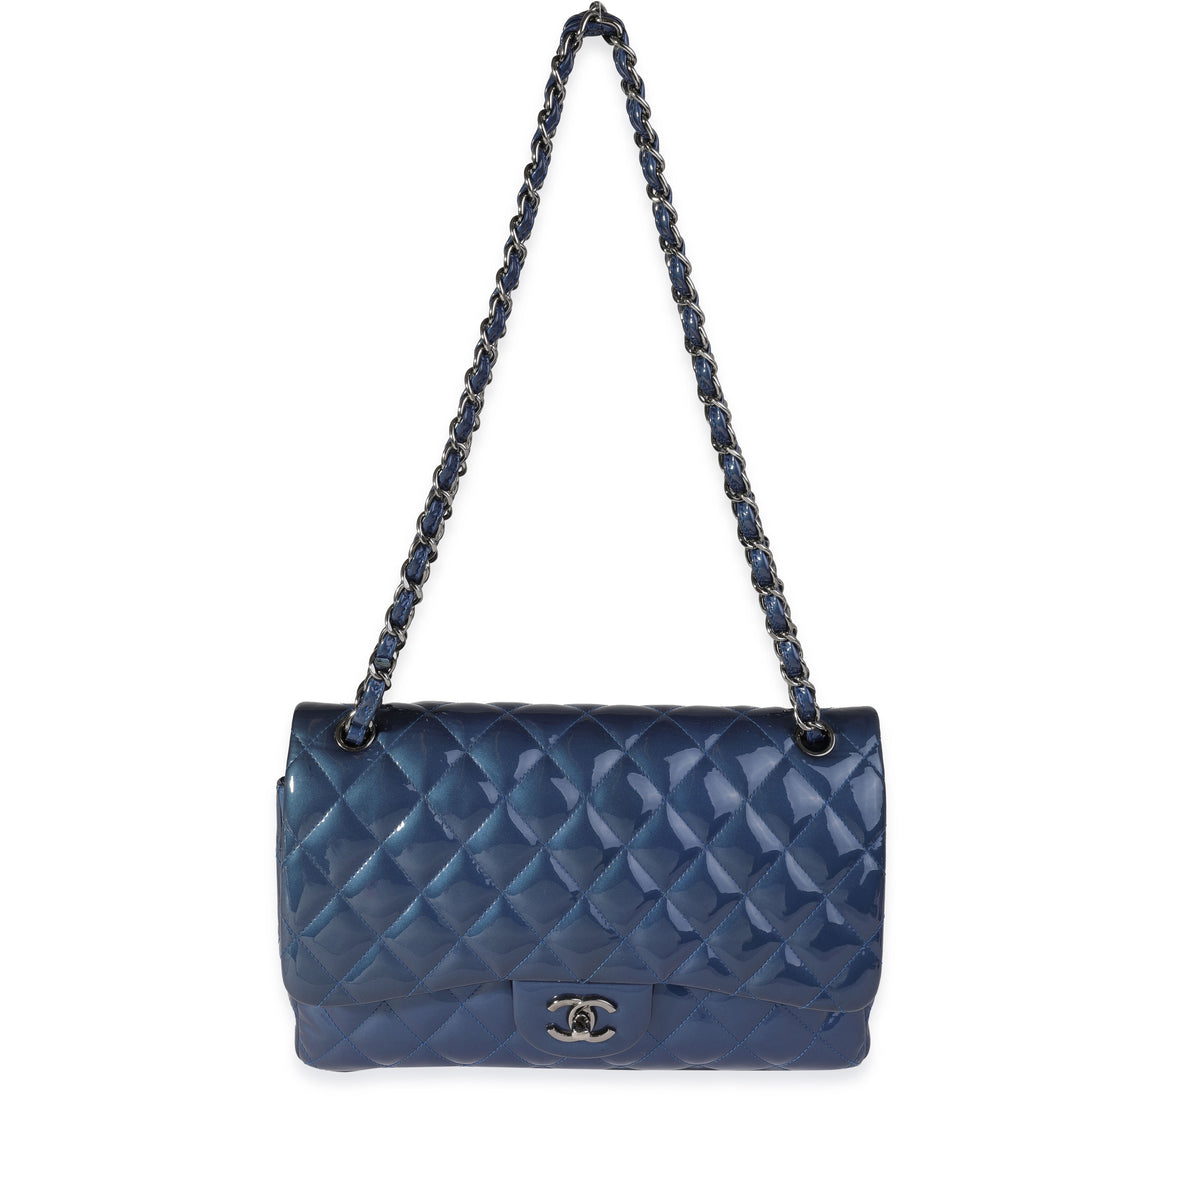 Chanel Blue Quilted Patent Leather Jumbo Classic Double Flap Bag, myGemma